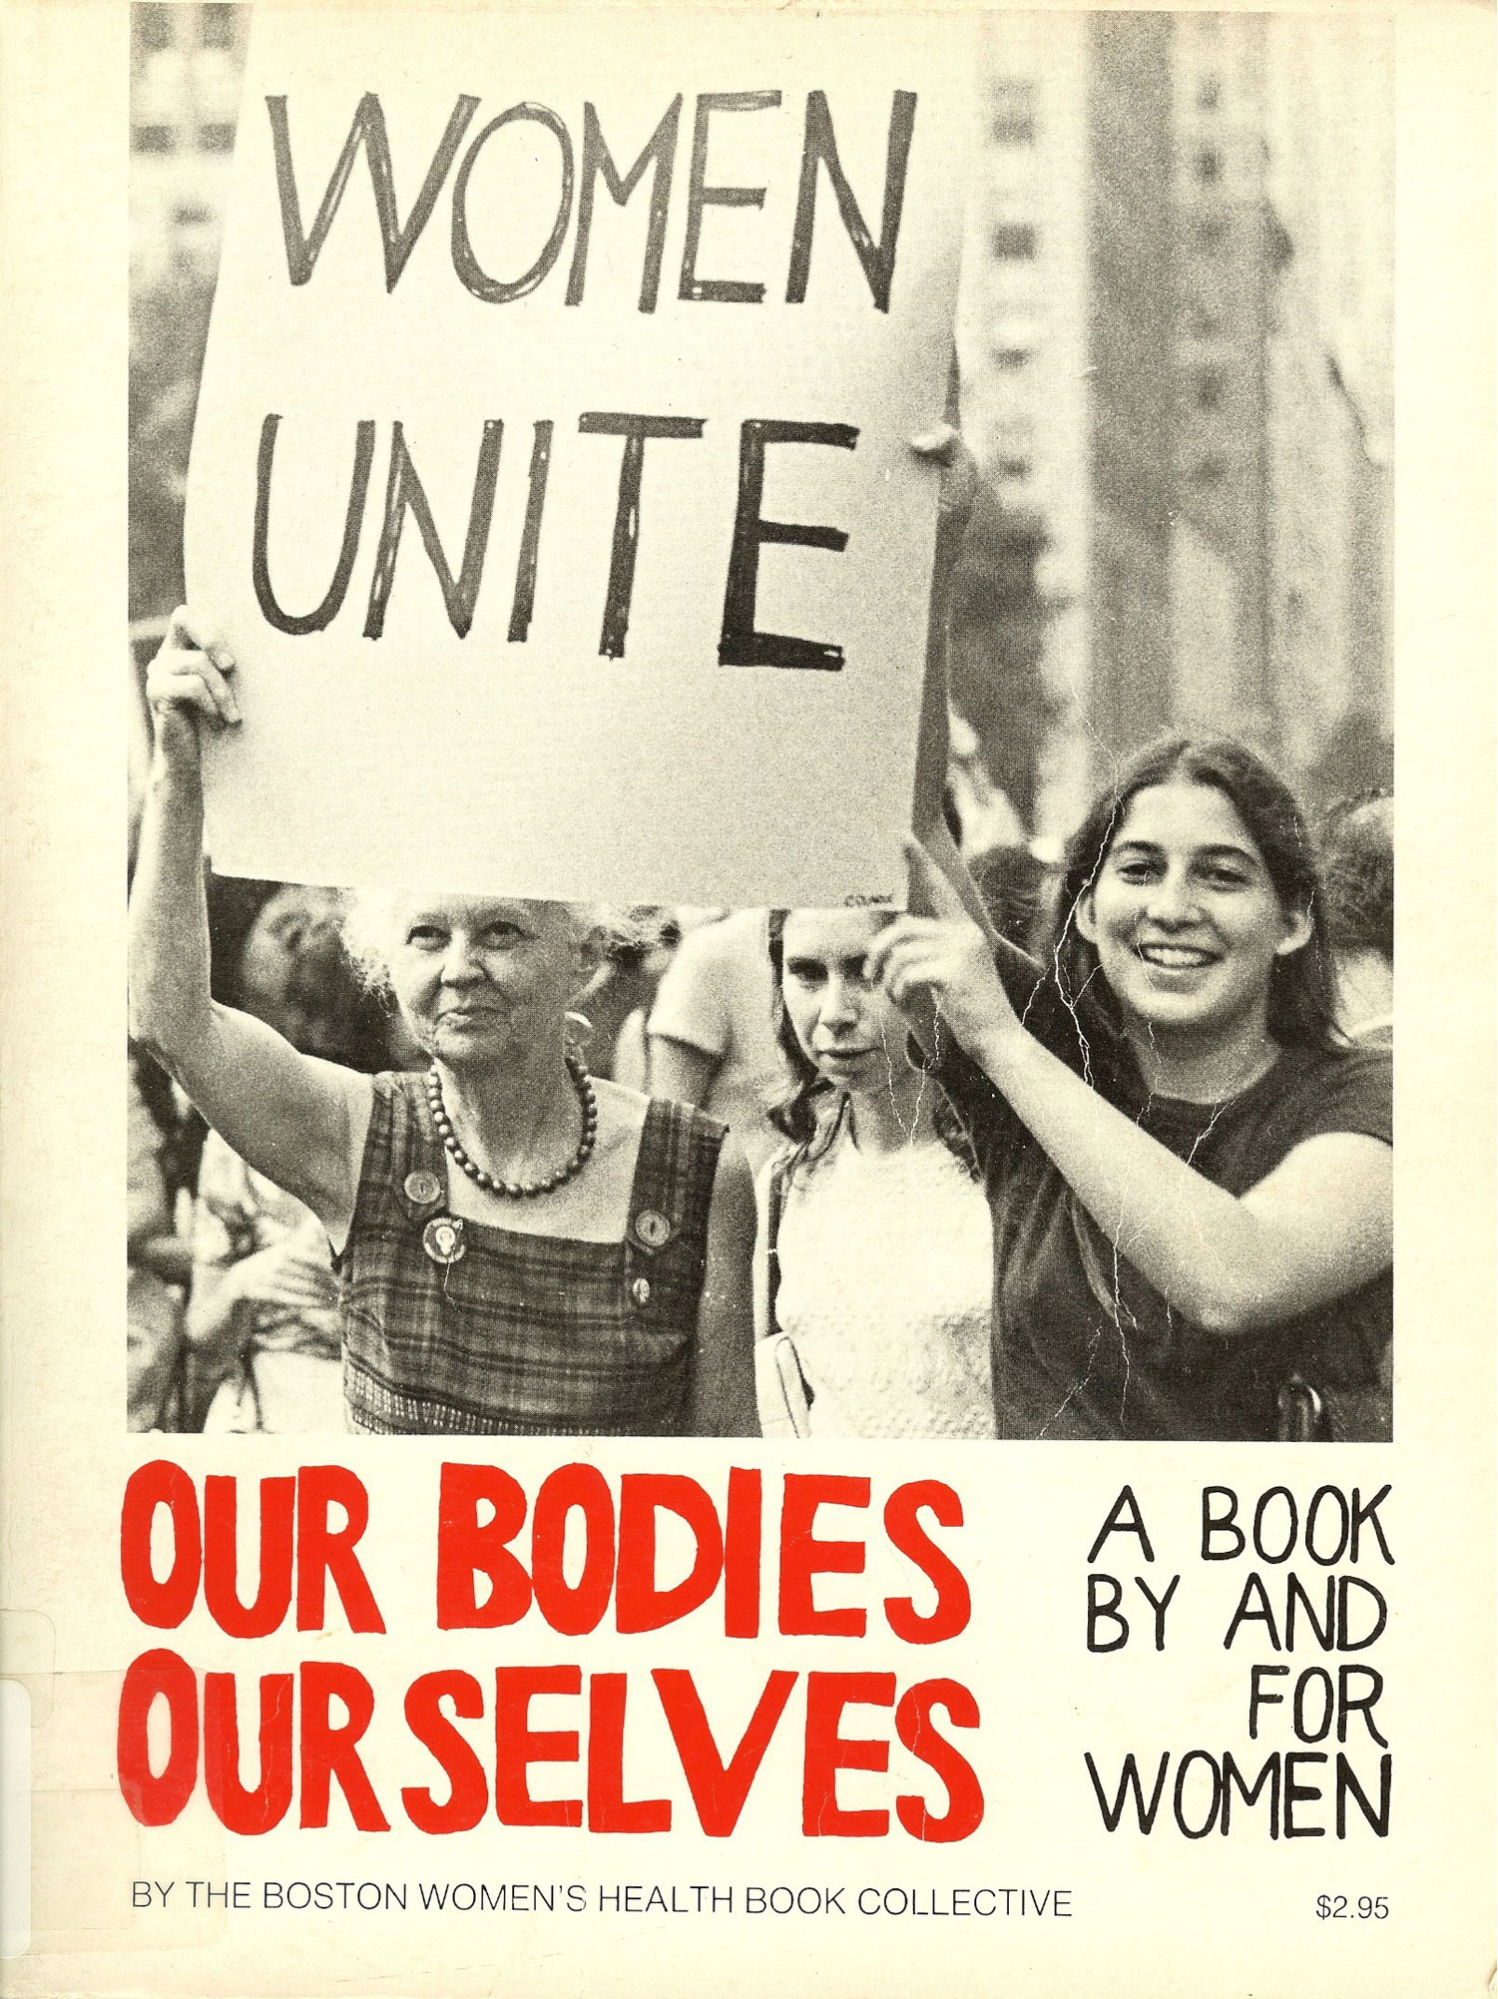 Cover of Our Bodies Our Selves shows intergenerational women marching together with signs